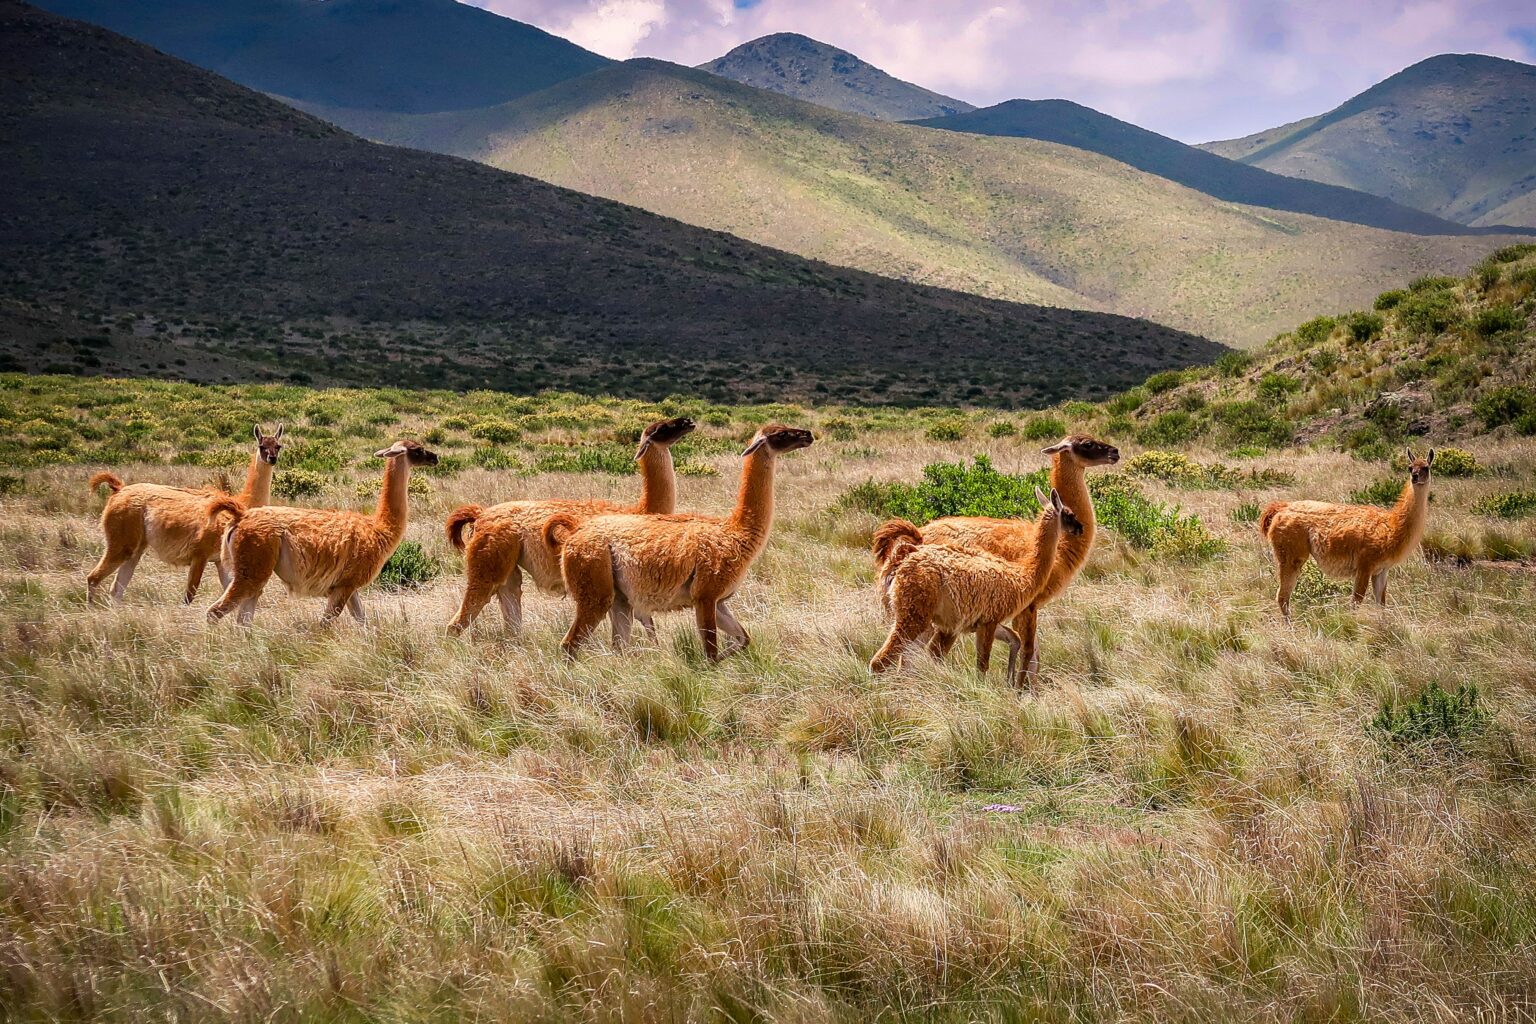 Guanacos walking through plains in front of mountains